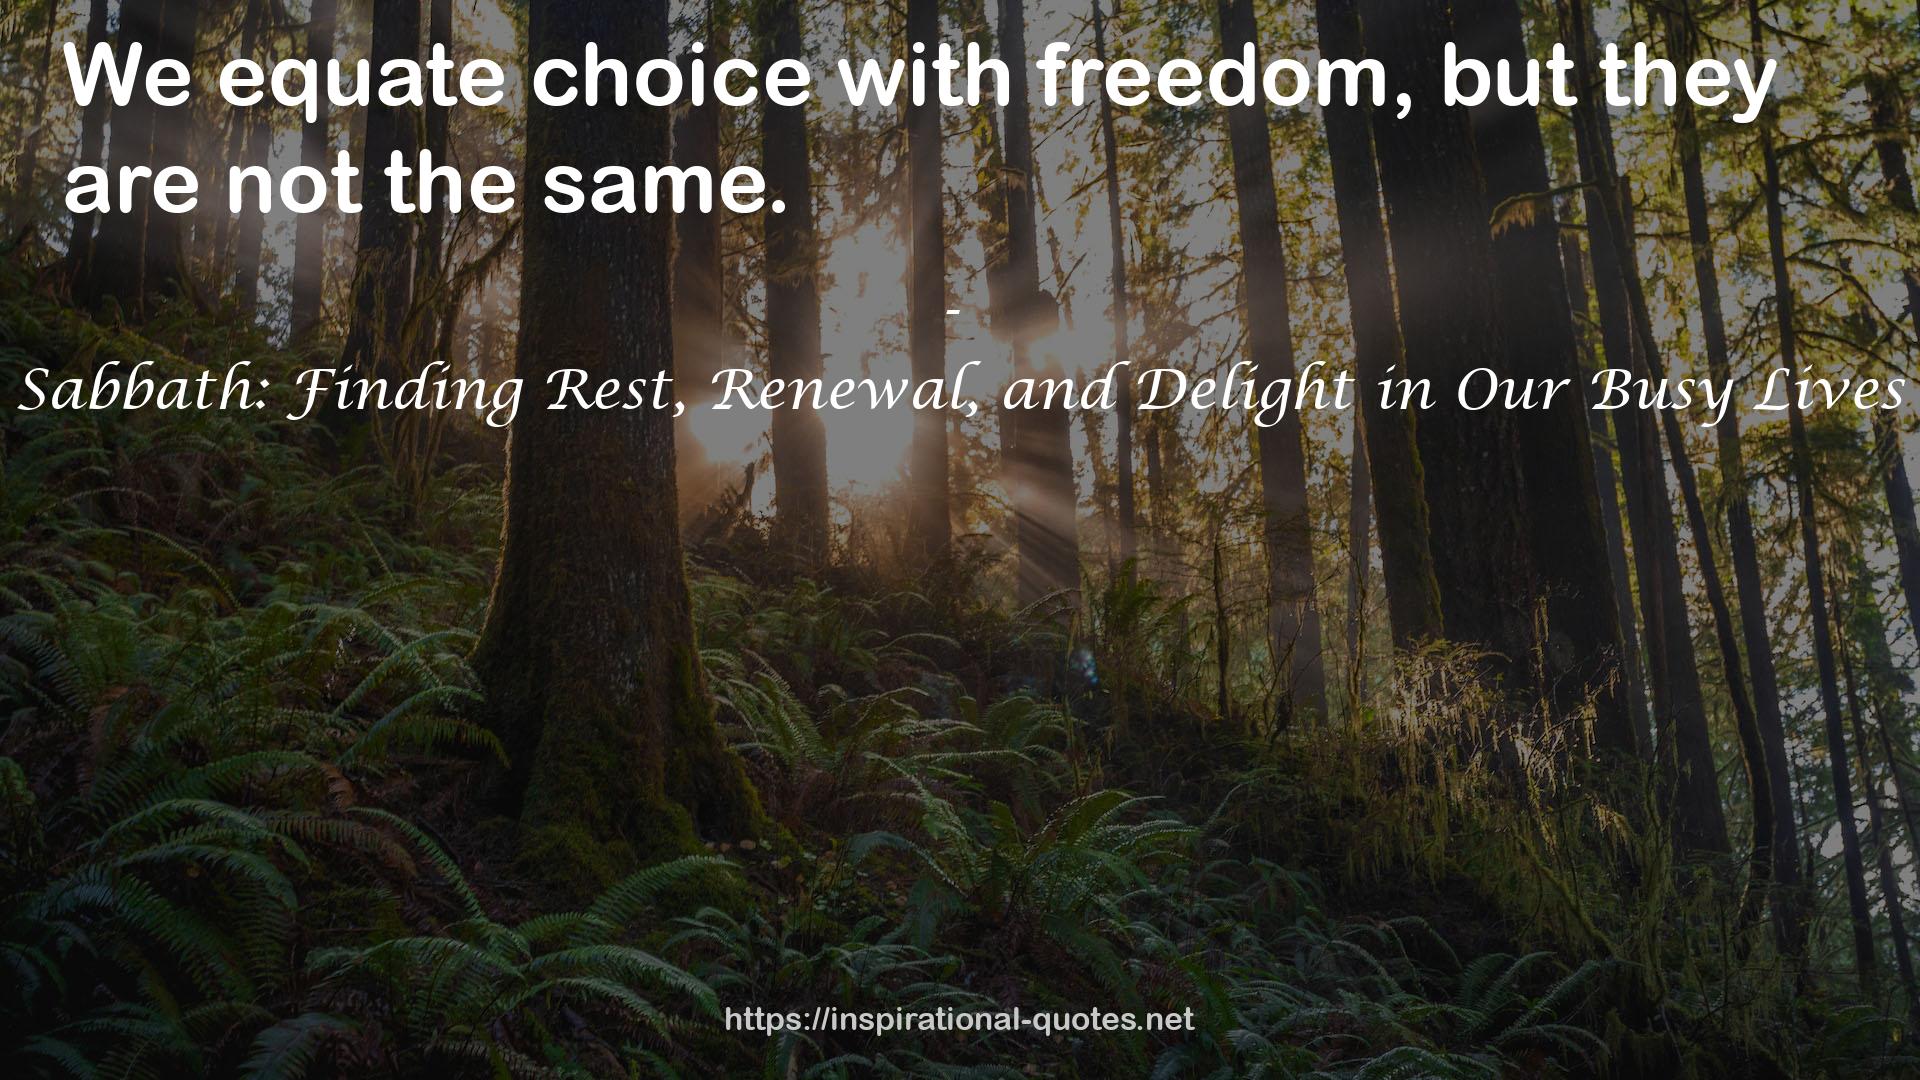 Sabbath: Finding Rest, Renewal, and Delight in Our Busy Lives QUOTES